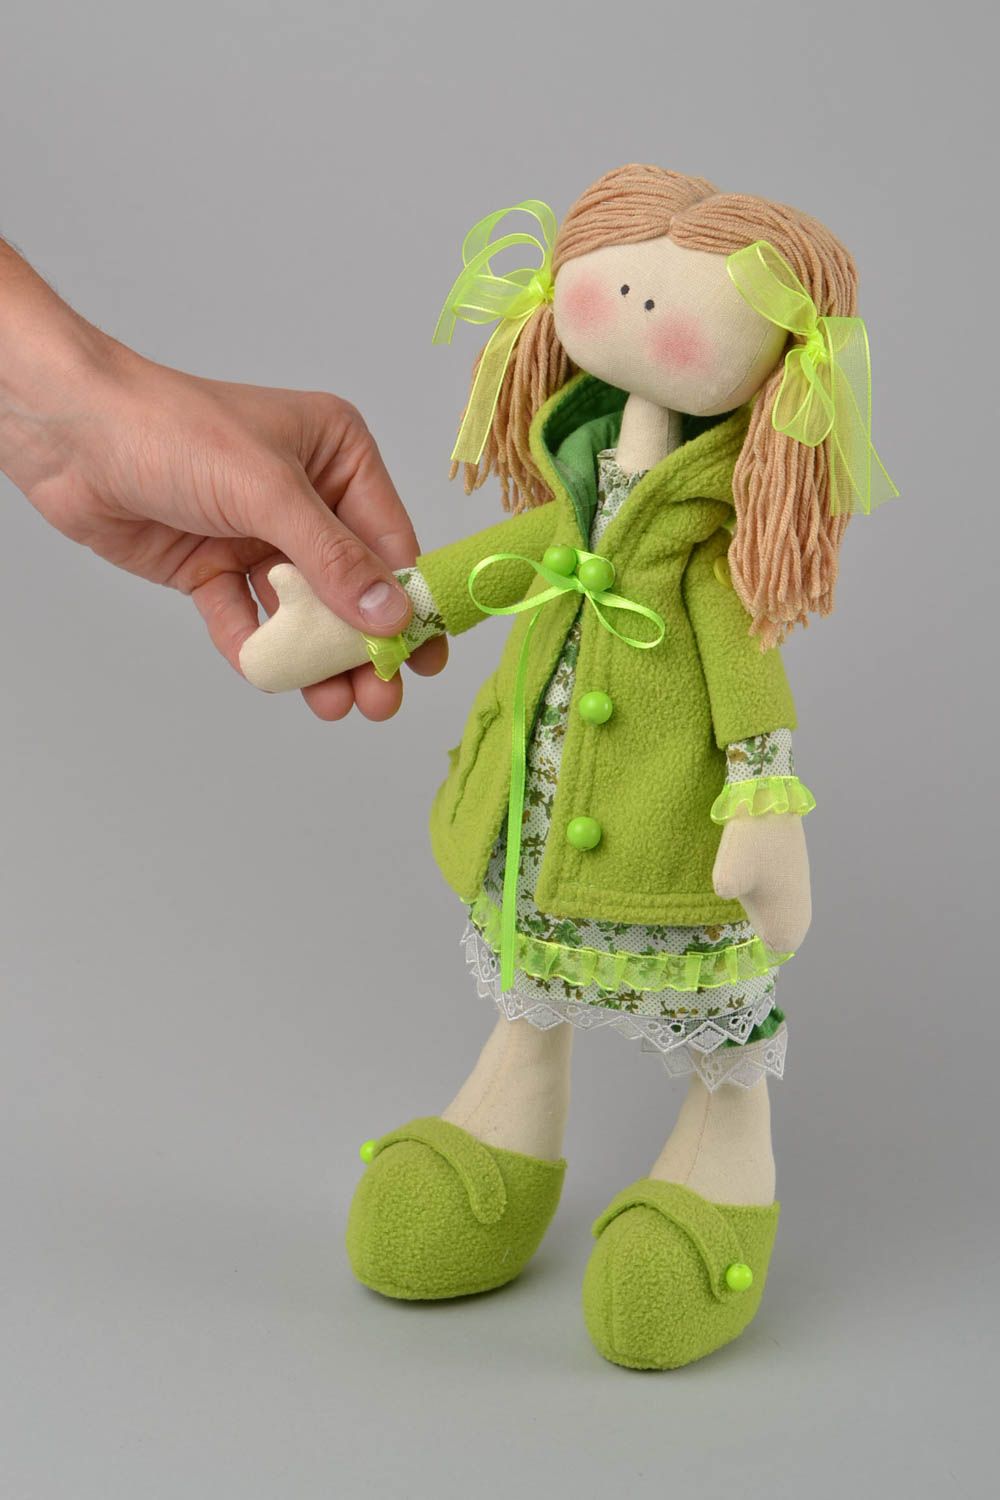 Handmade designer fabric soft doll girl in green clothing with pig tails photo 2